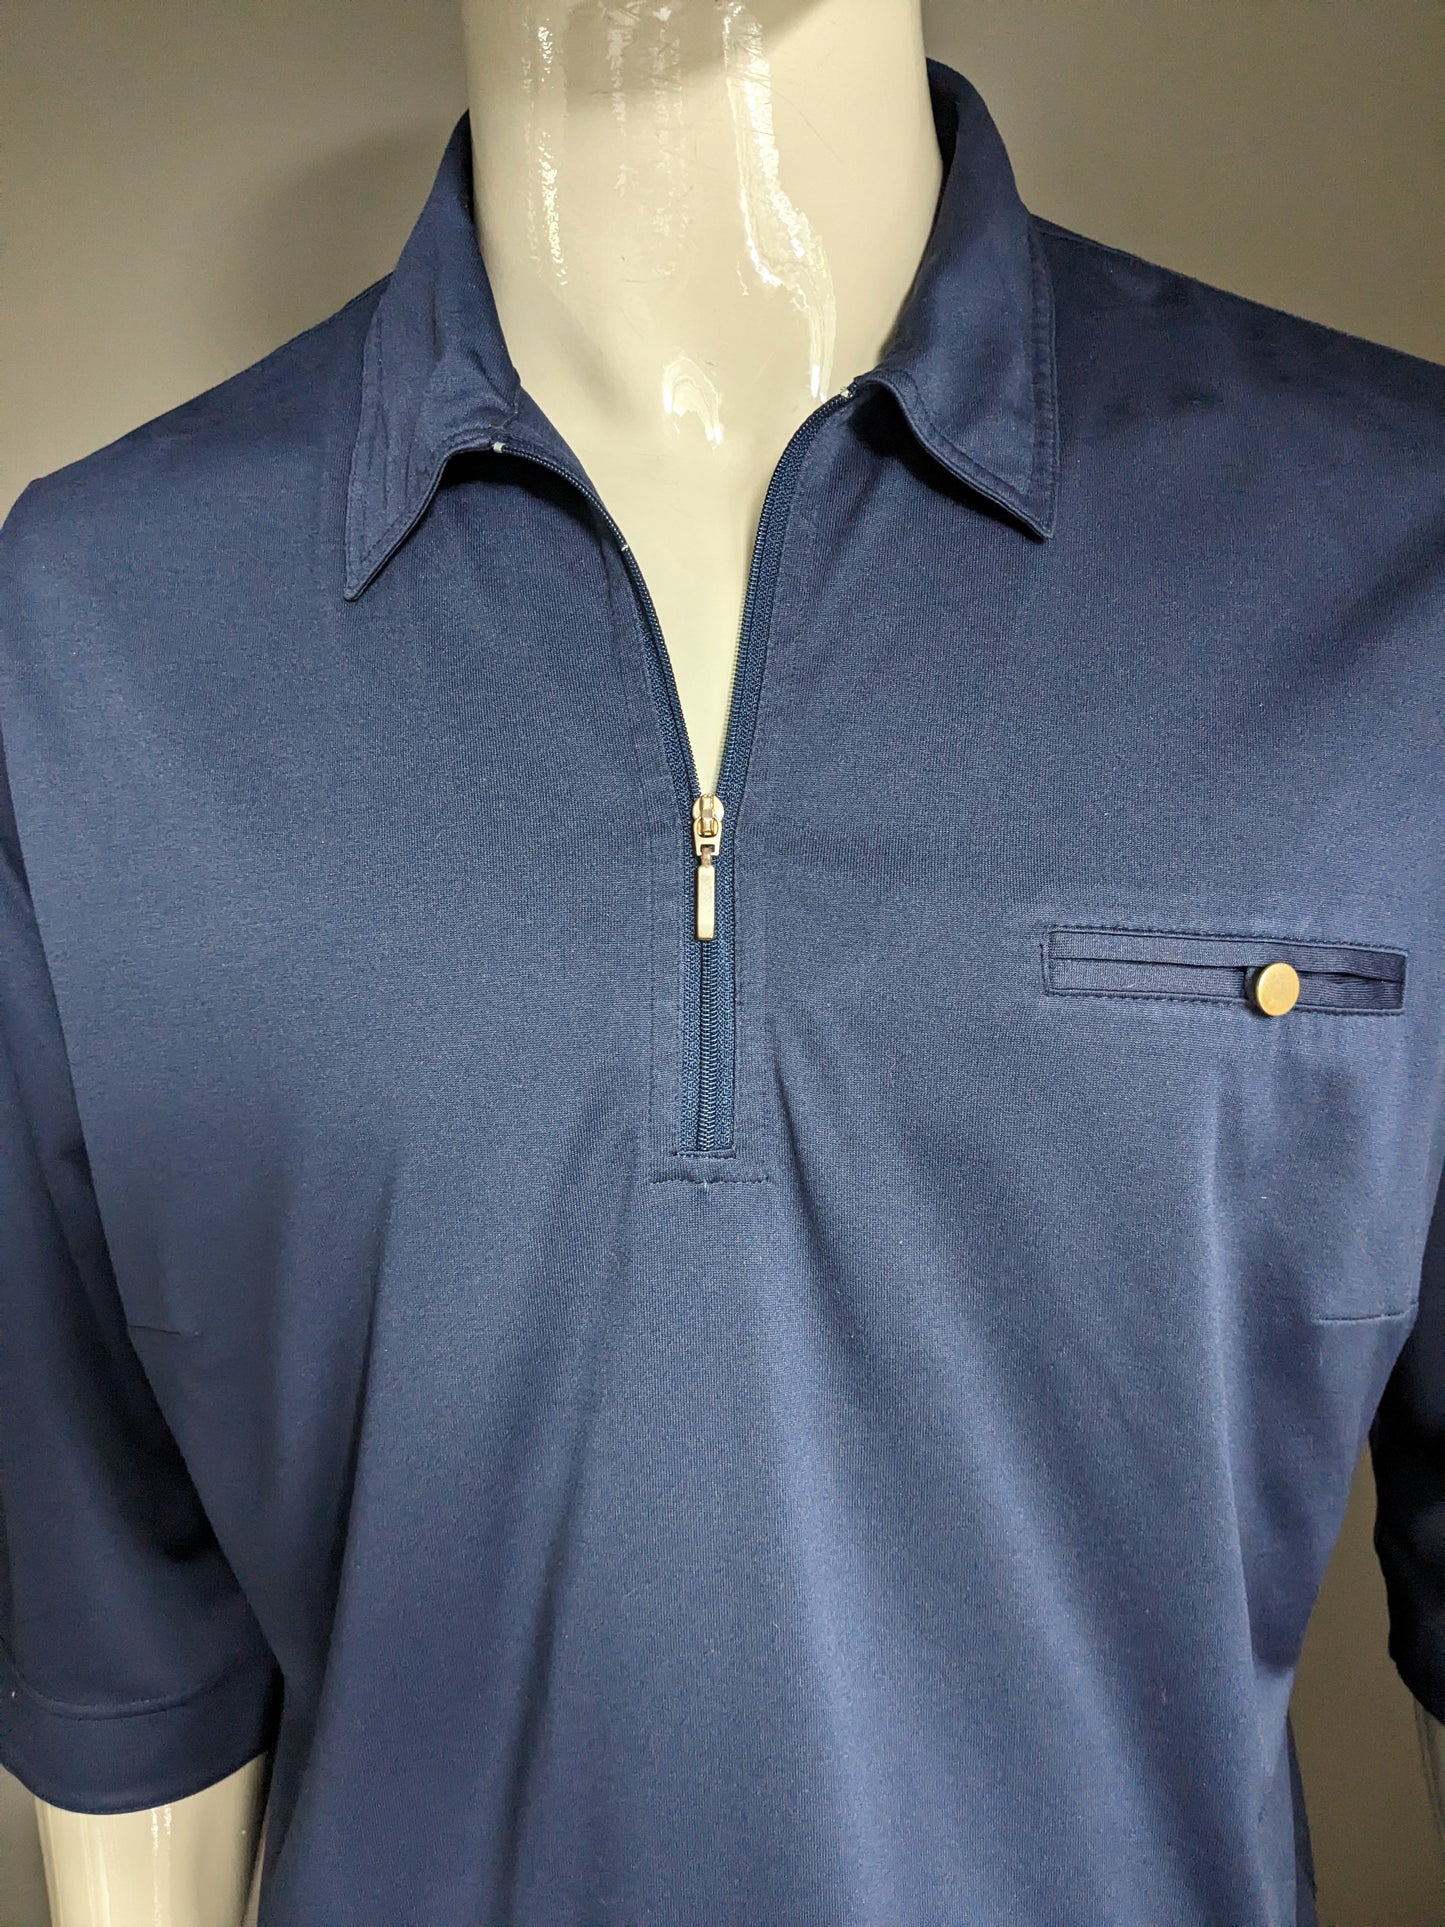 Vintage polo with elastic band and zipper and 3/4th sleeves. Dark blue colored. Size XL.